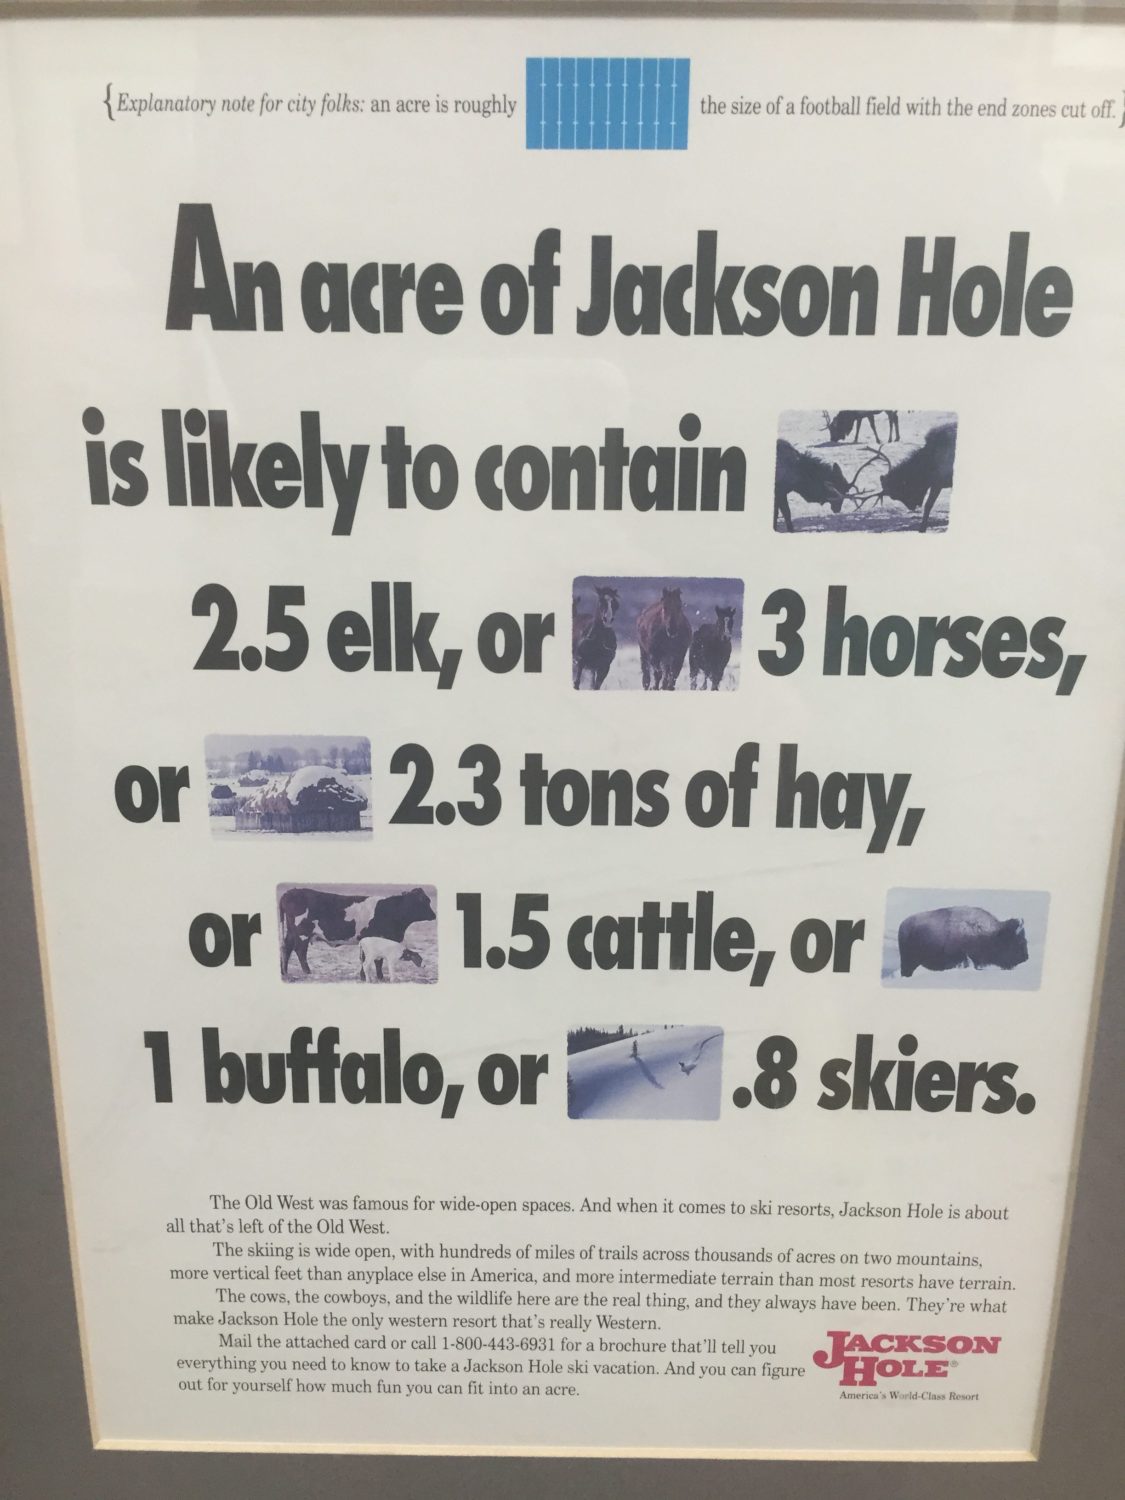 Classy advertising from Jackson Hole.